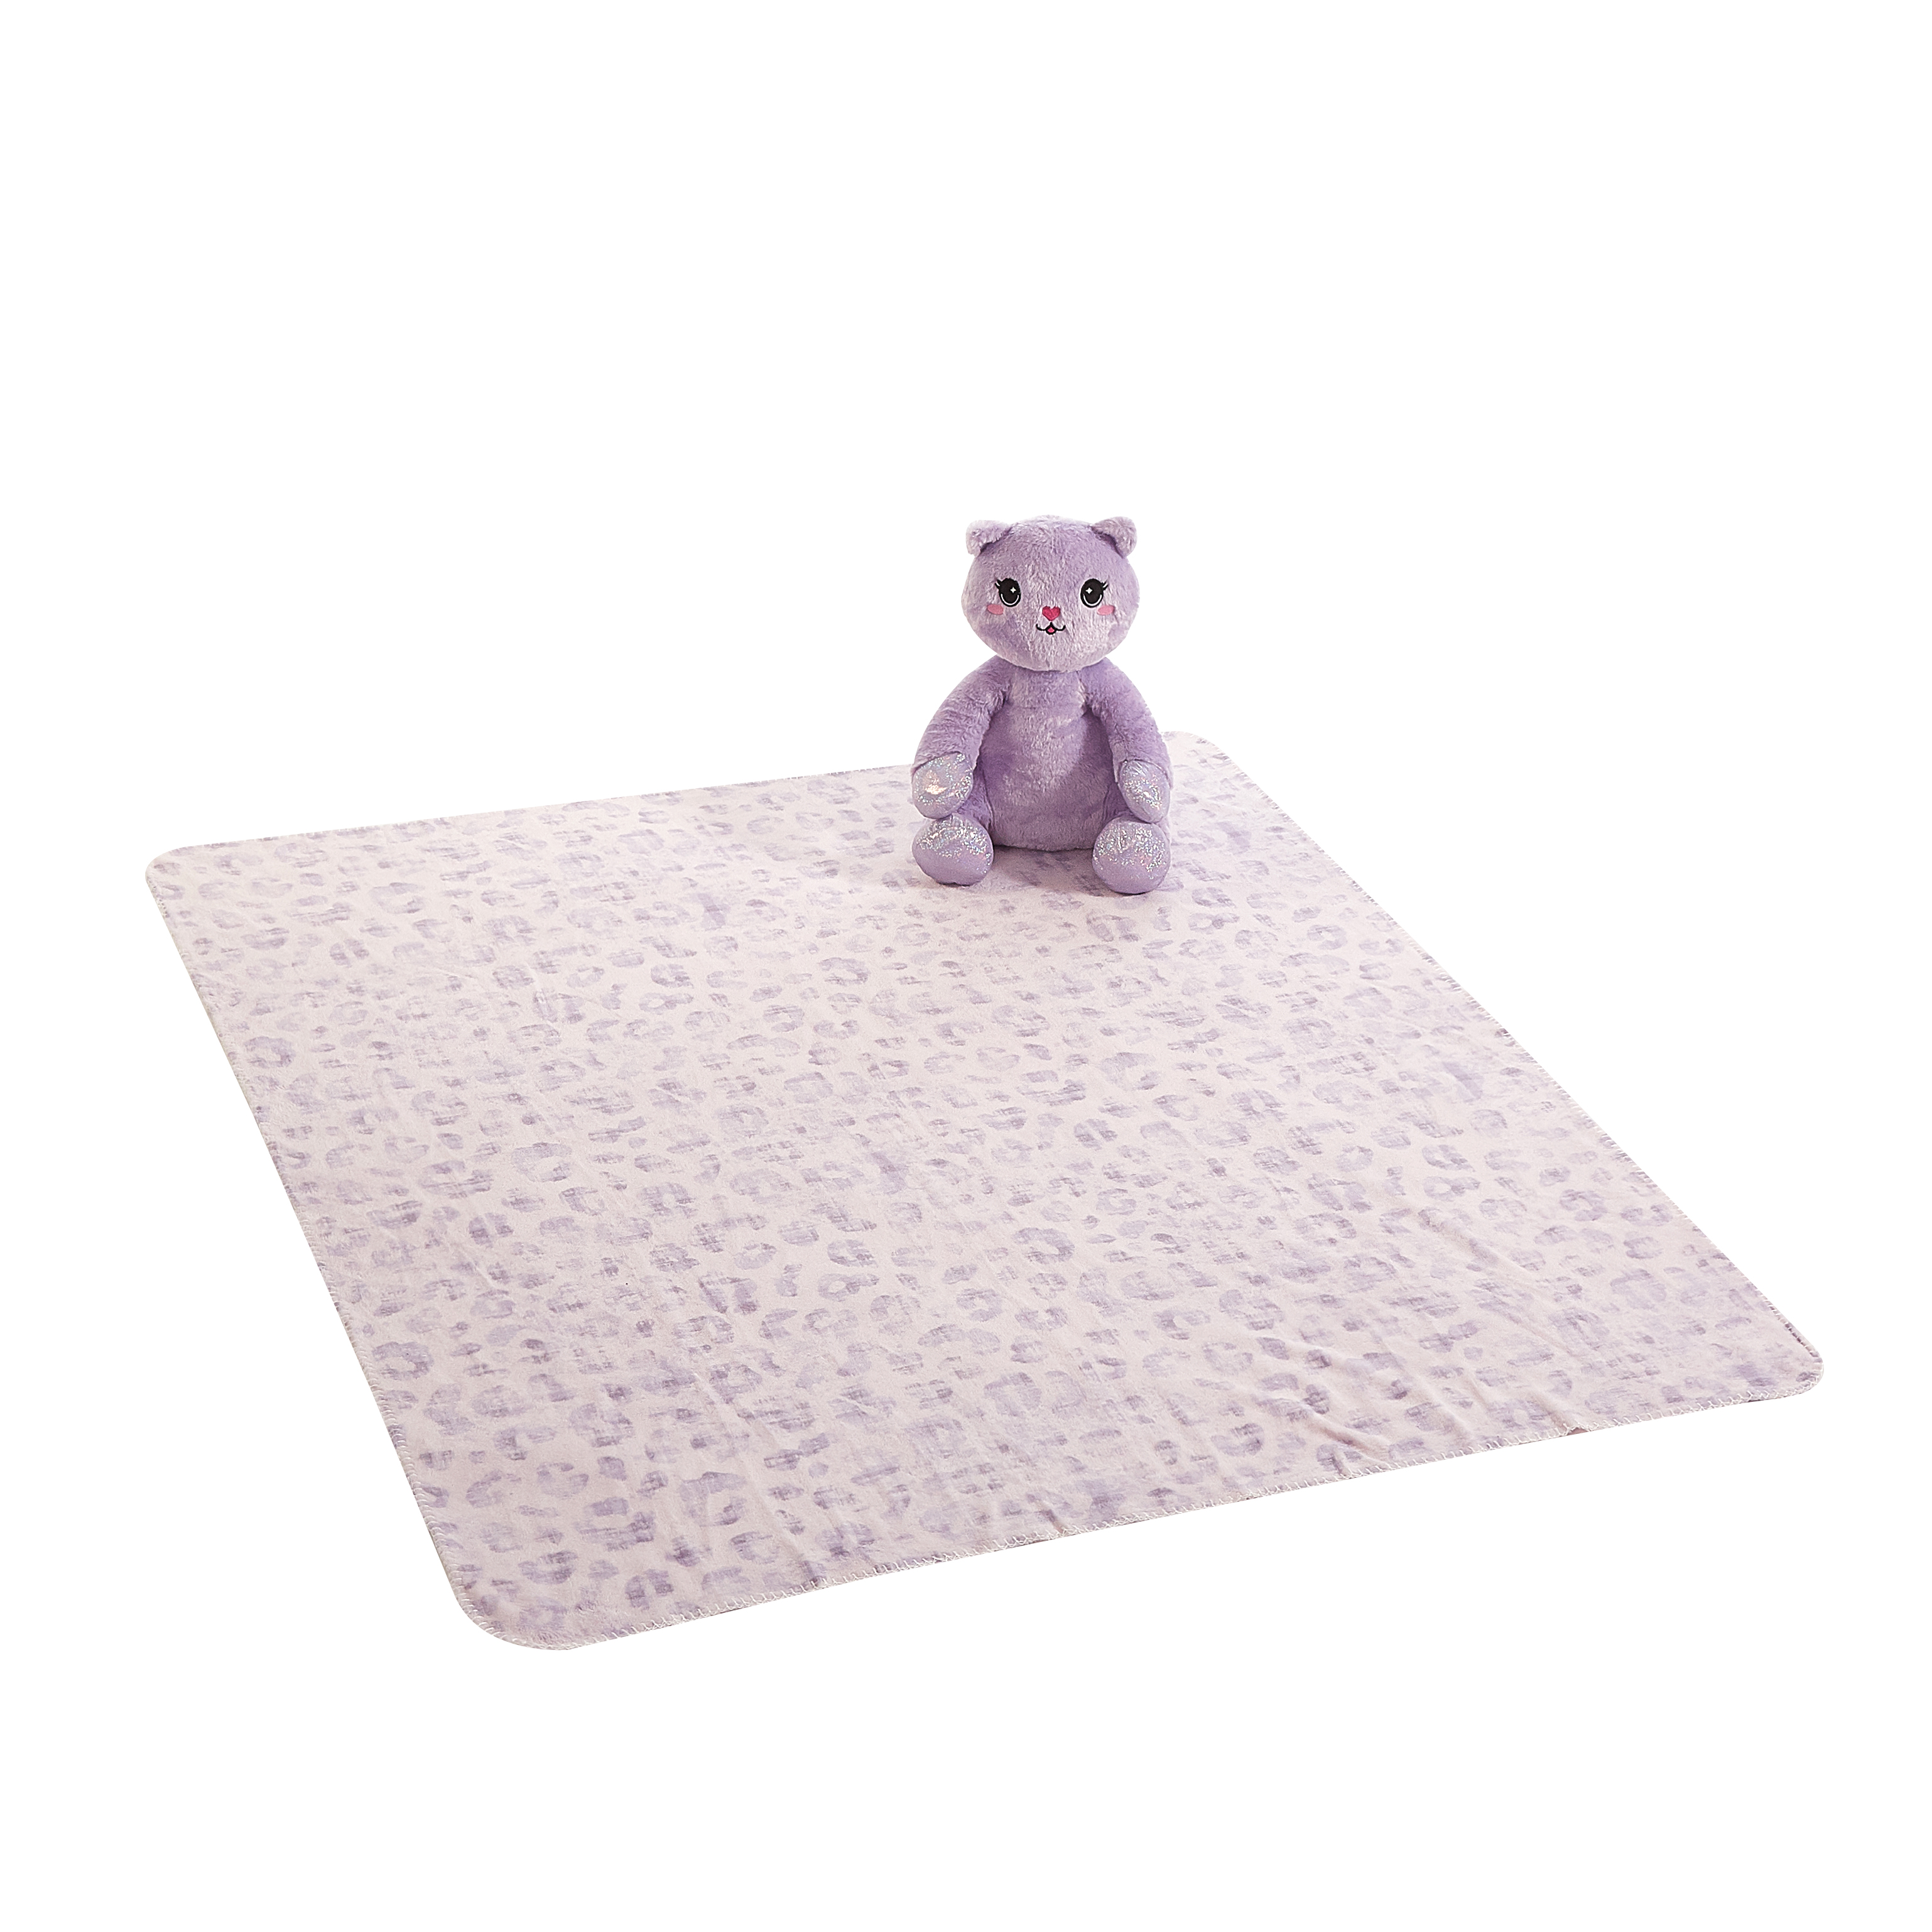 Your Zone Kids Figural Hugger and 50" x 60" Soft Plush Throw 2 Piece Set, Kitty, Polyester, Spot Clean - image 3 of 7